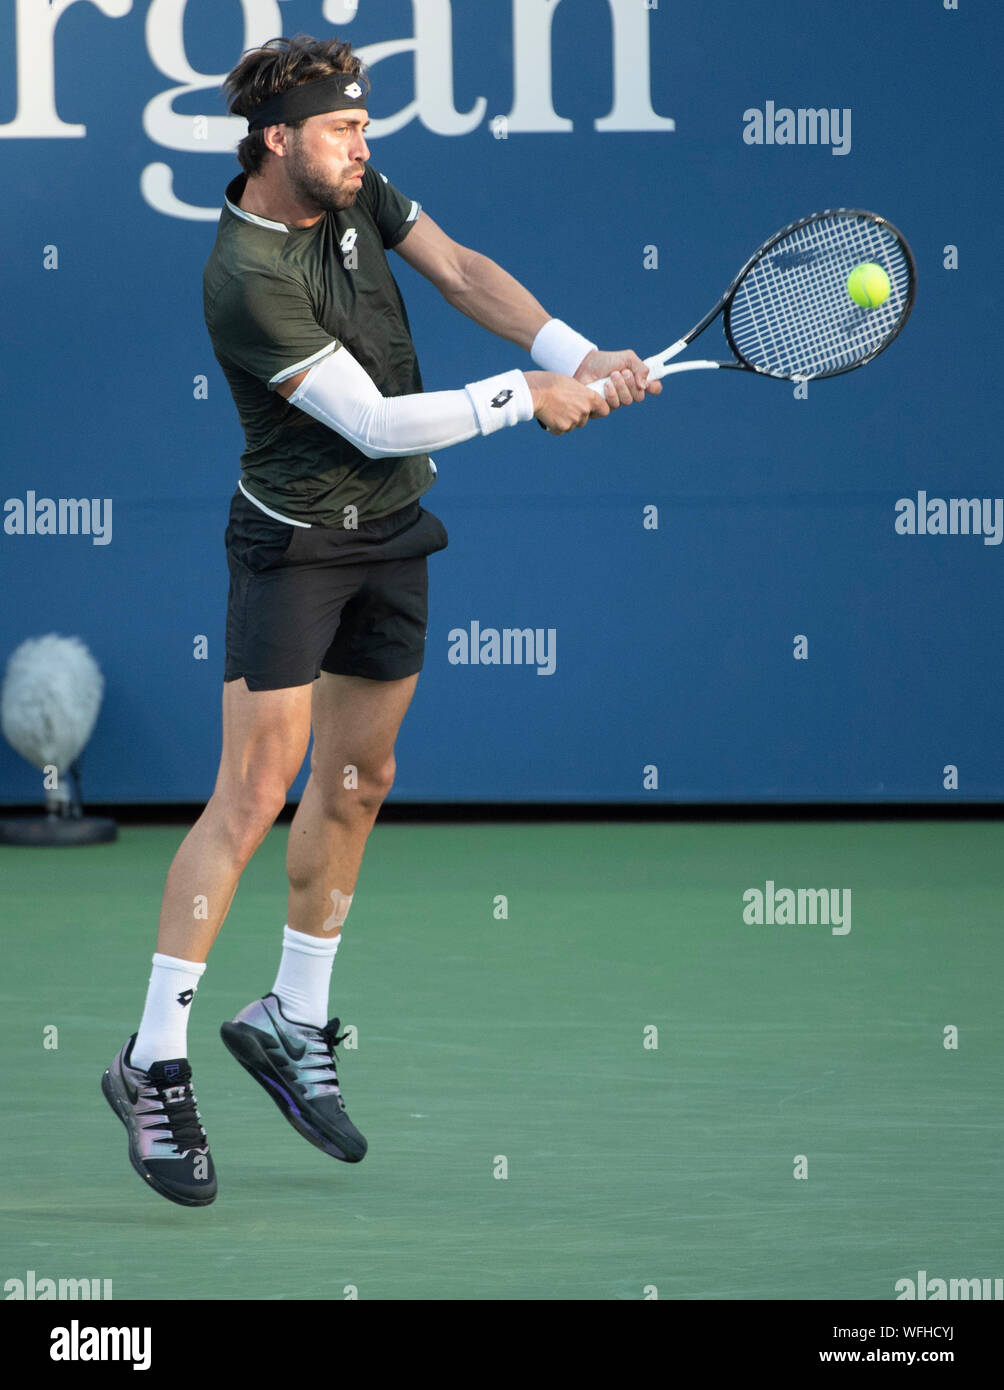 August 30, 2019: Nikoloz Basilashvili (GEO) loses to Dominik Koepfer (GER) 6-3, 7-6, 4-6, 6-1, at the US Open being played at Billie Jean King National Tennis Center in Flushing, Queens, NY. © Jo Becktold/CSM Credit: Cal Sport Media/Alamy Live News Credit: Cal Sport Media/Alamy Live News Stock Photo